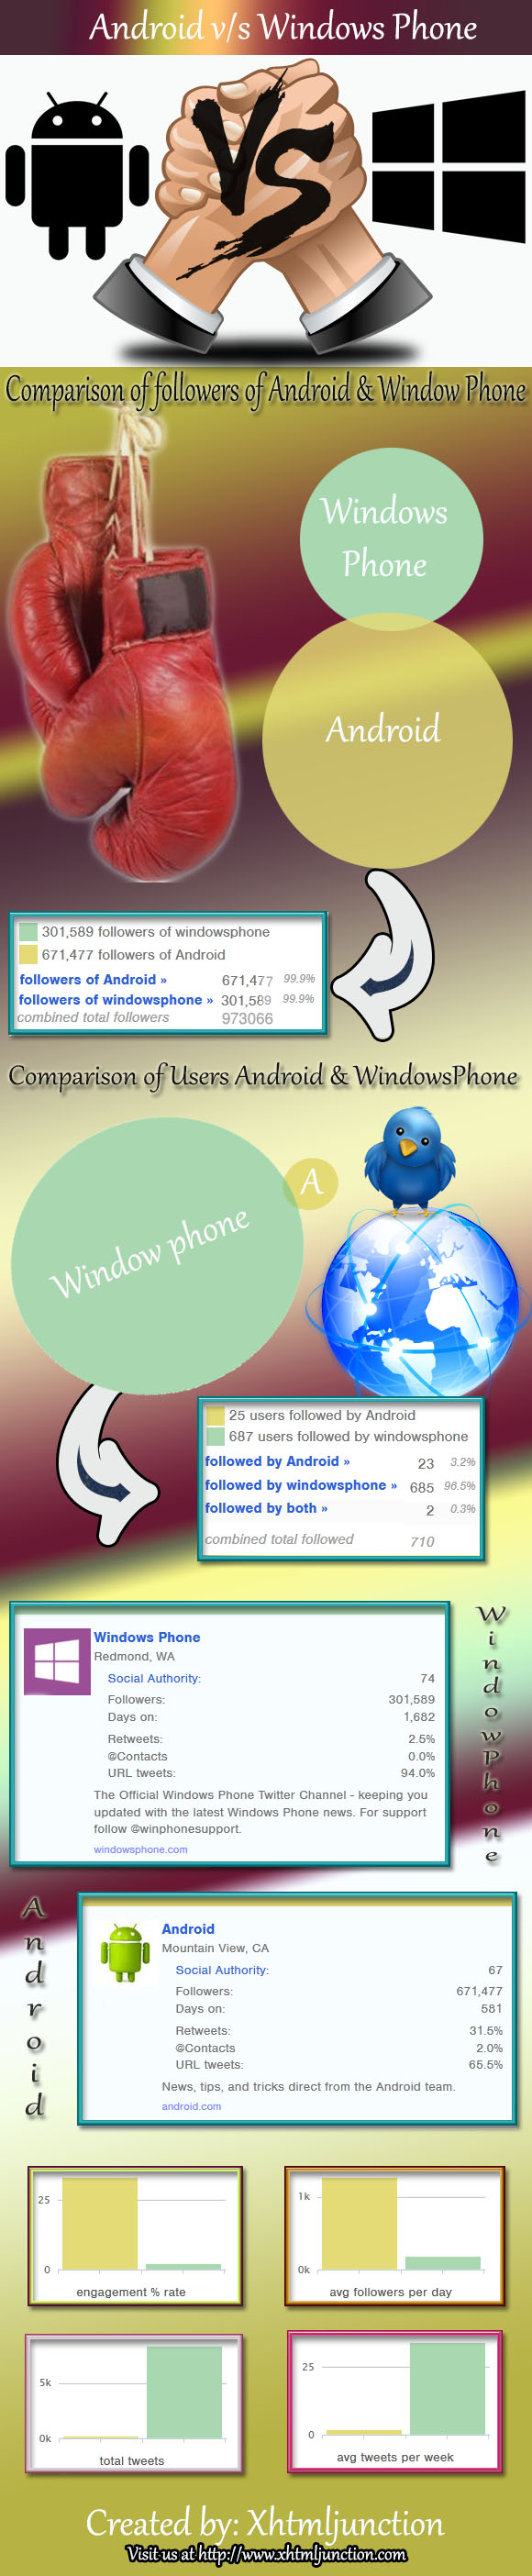 android vs windowphones infographic